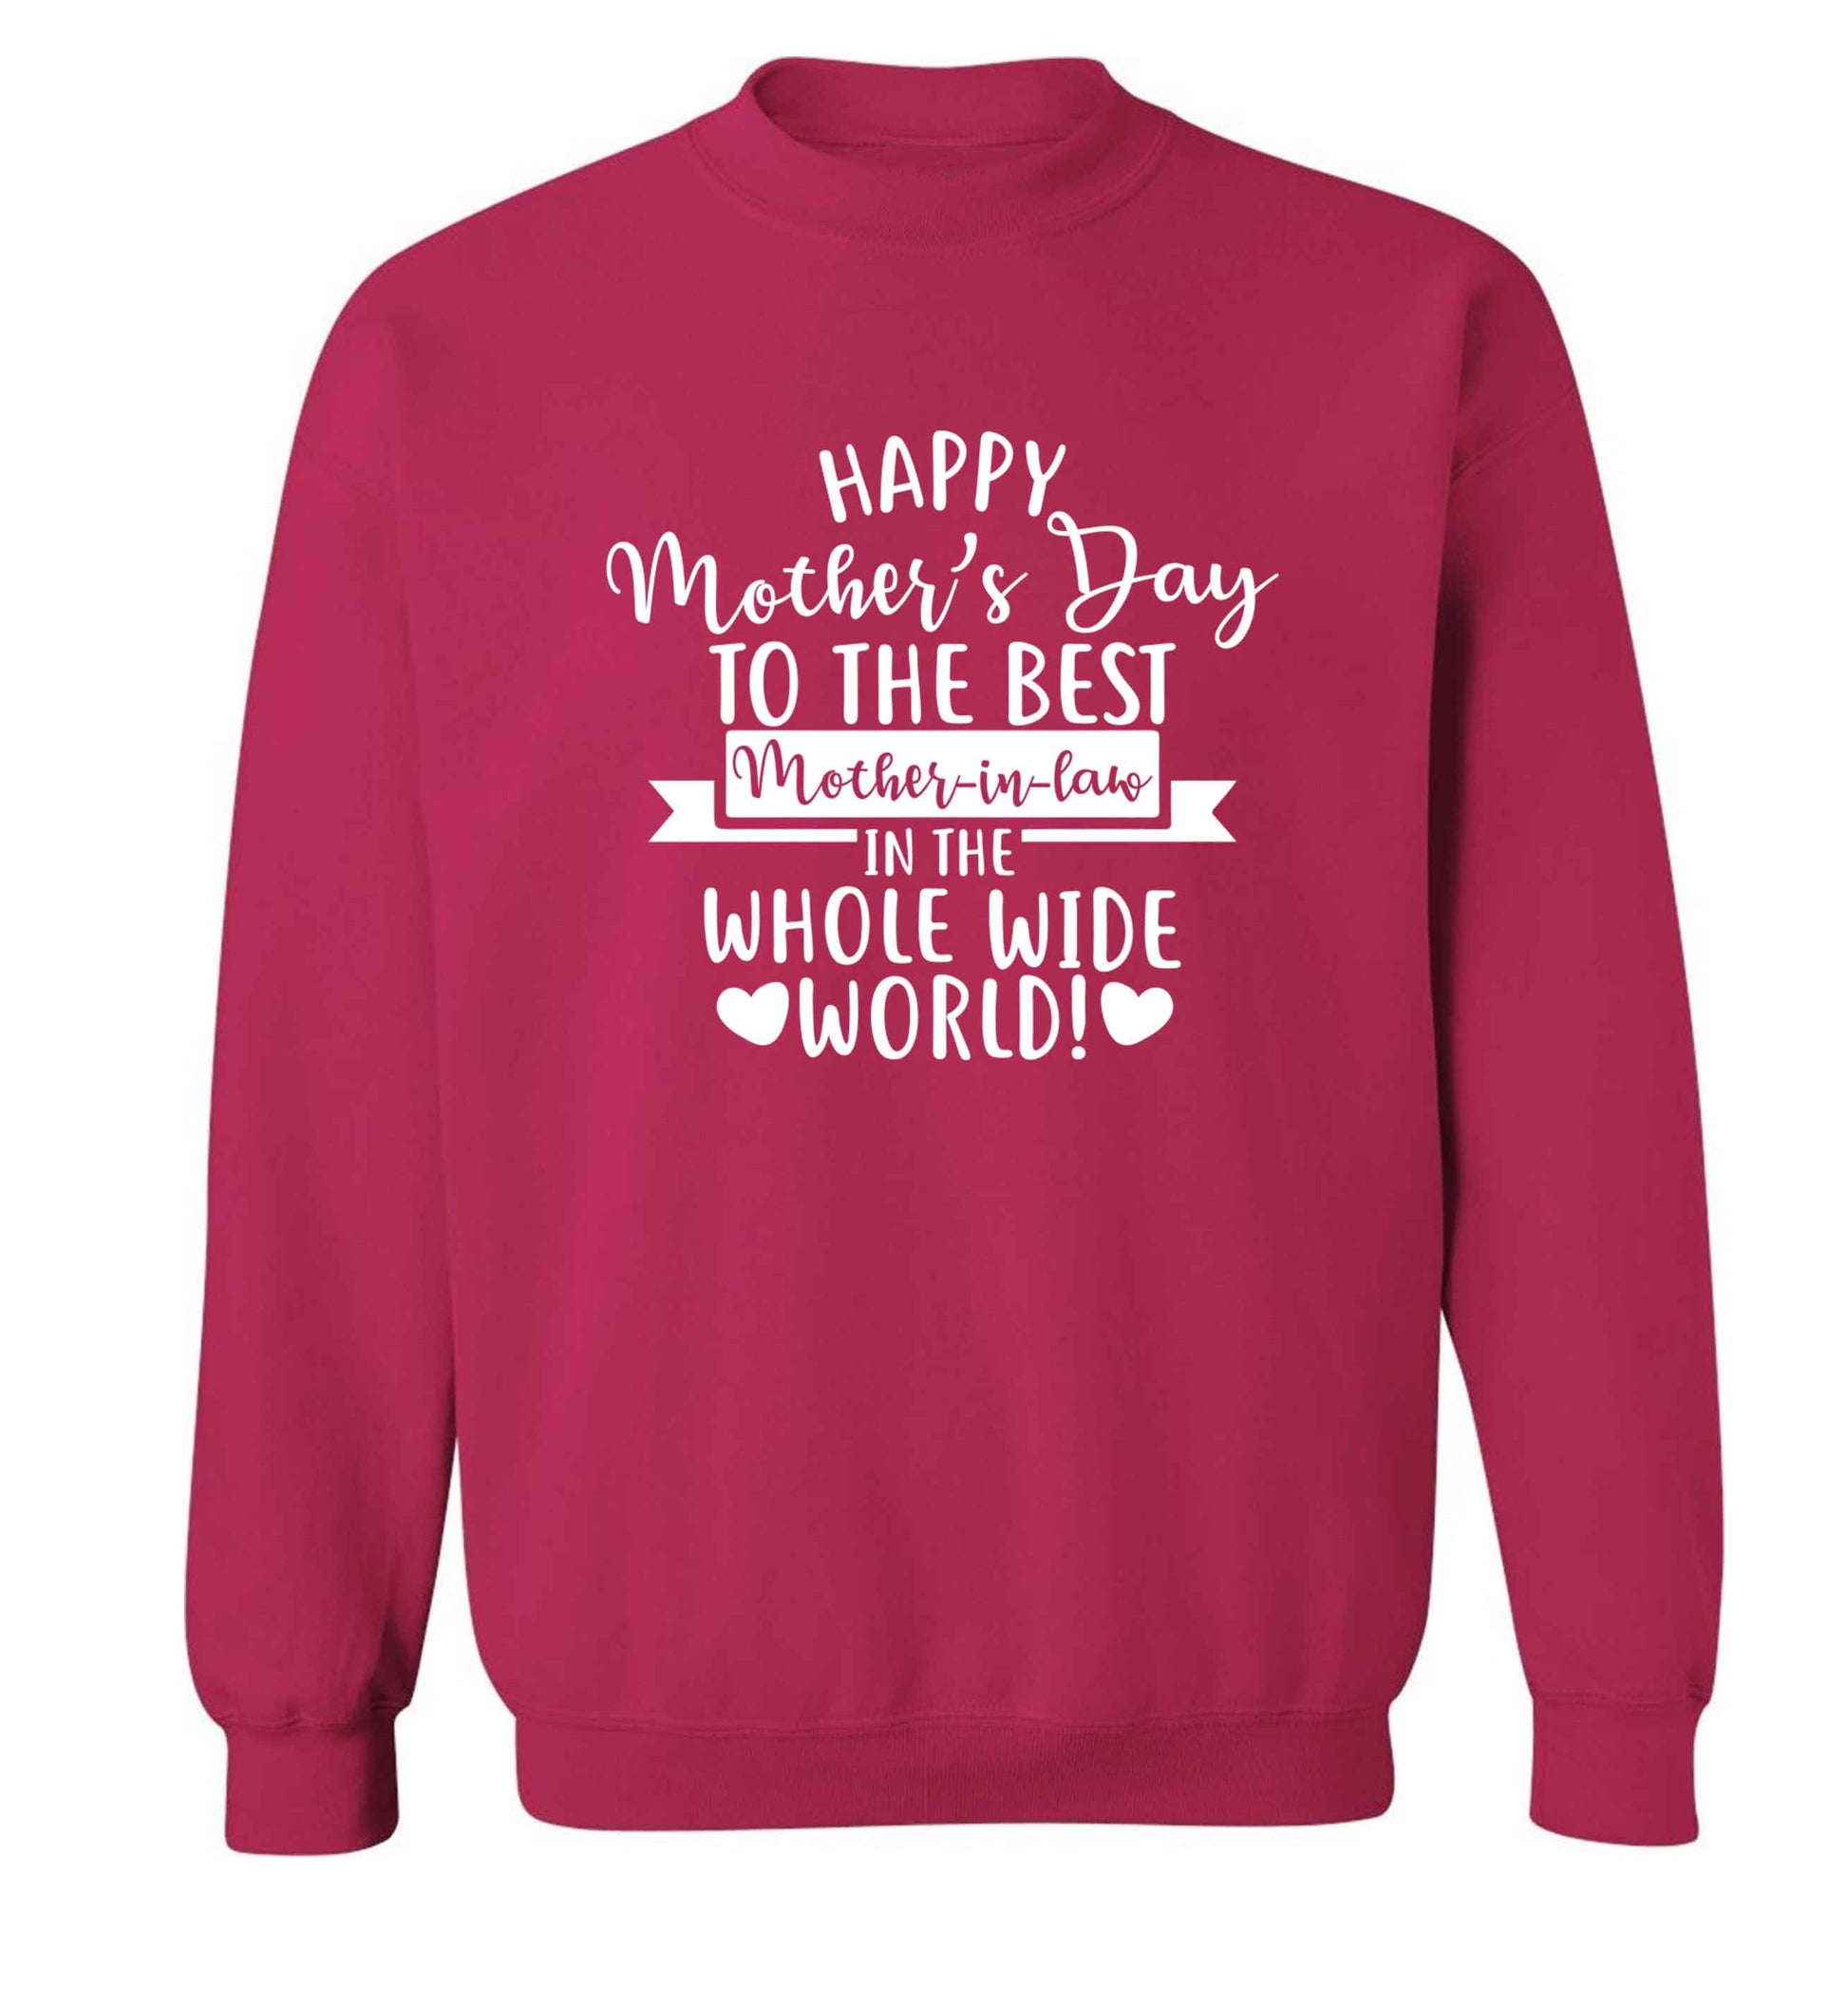 Happy mother's day to the best mother-in law in the world adult's unisex pink sweater 2XL